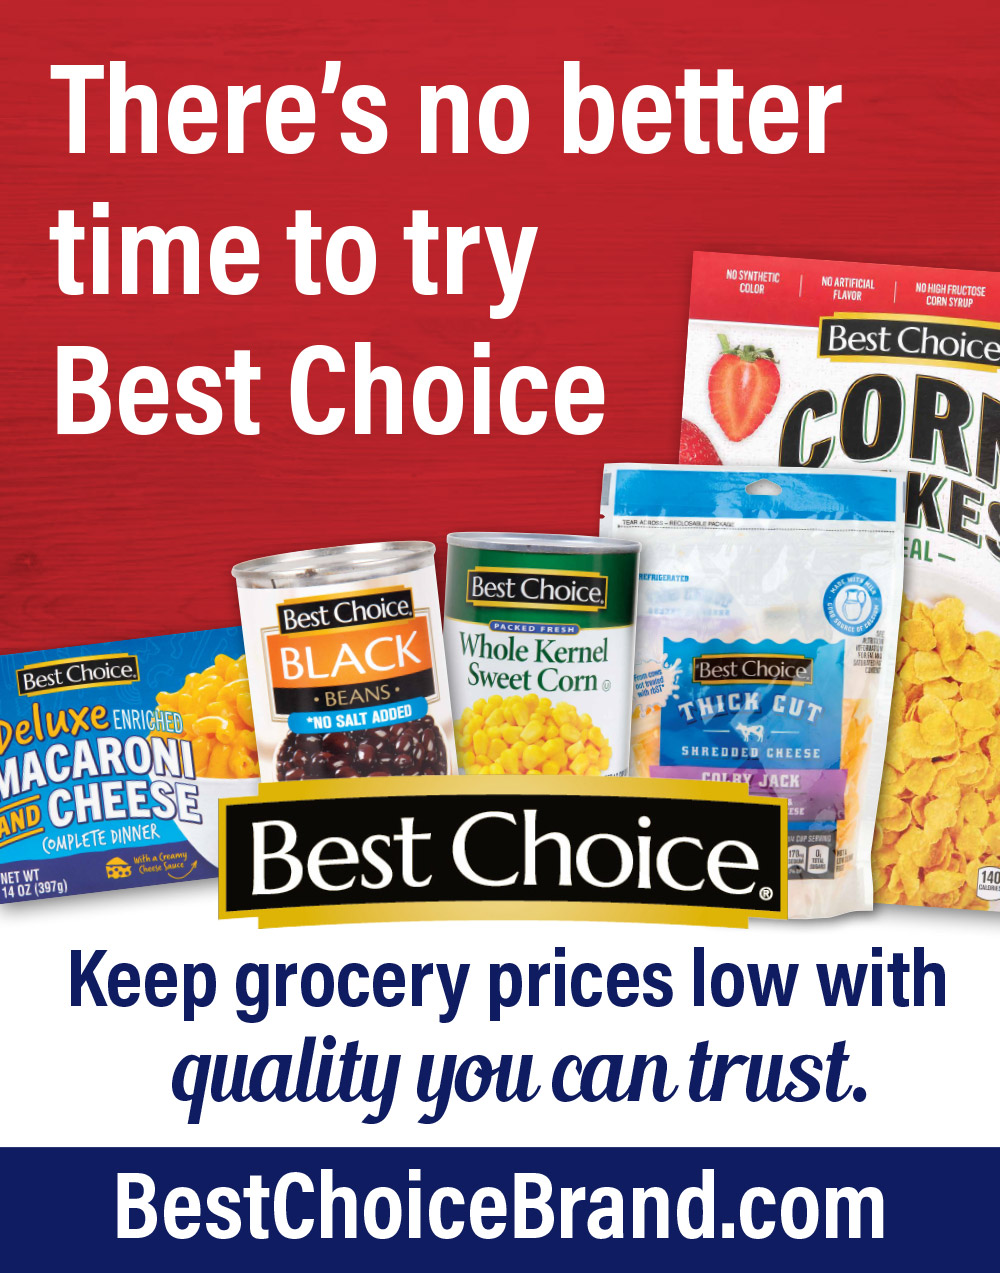 There's no better time to try Best Choice